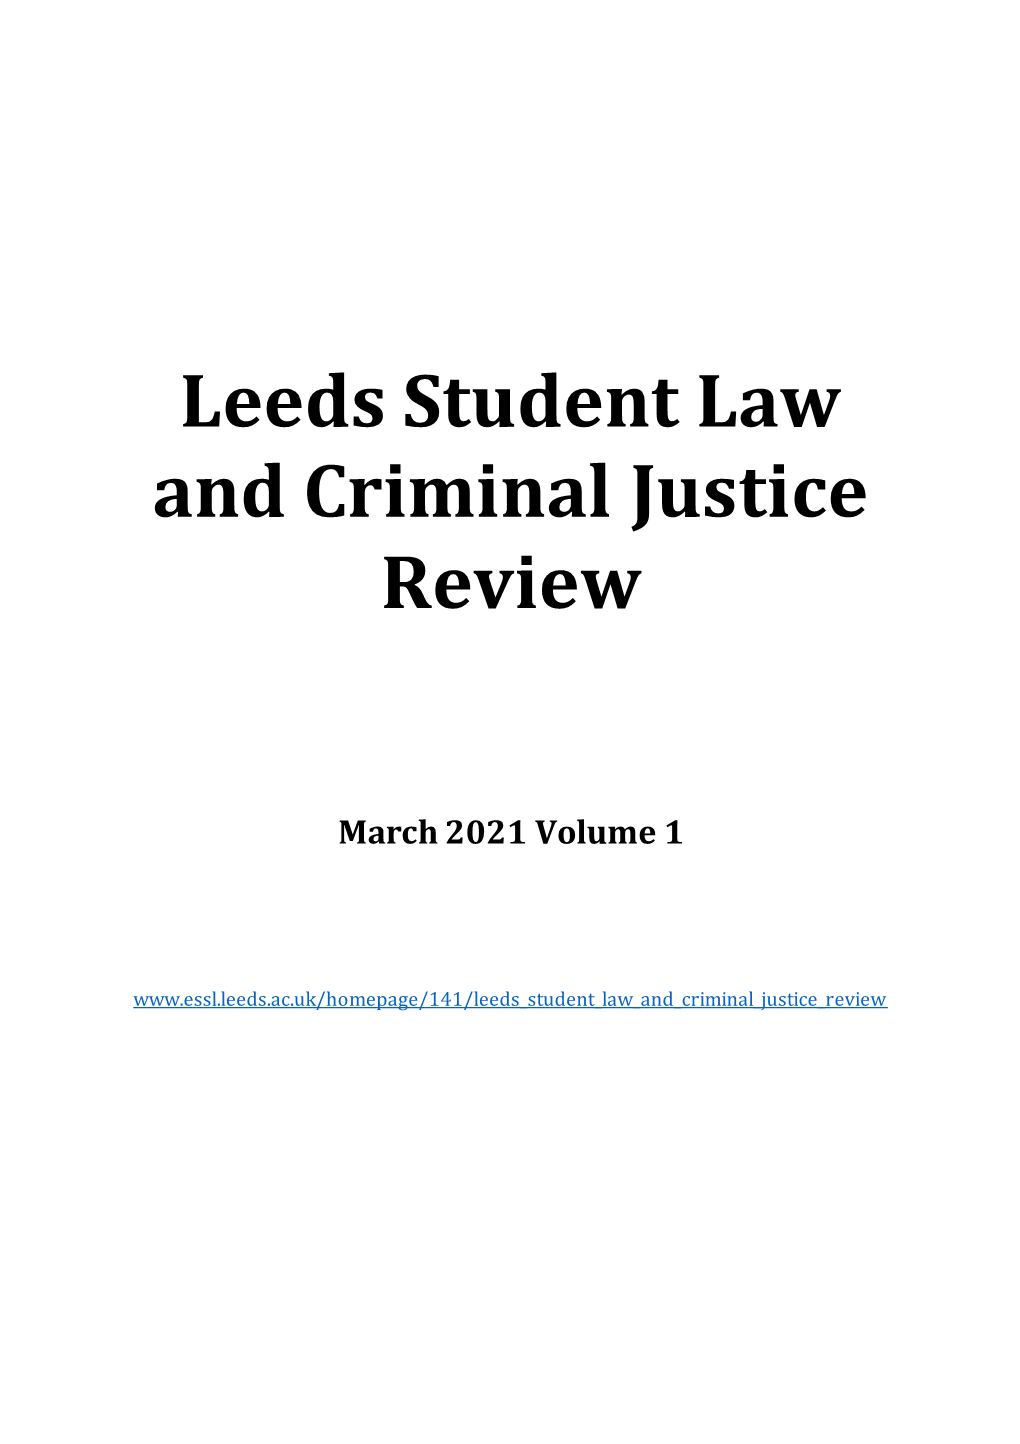 Leeds Student Law and Criminal Justice Review